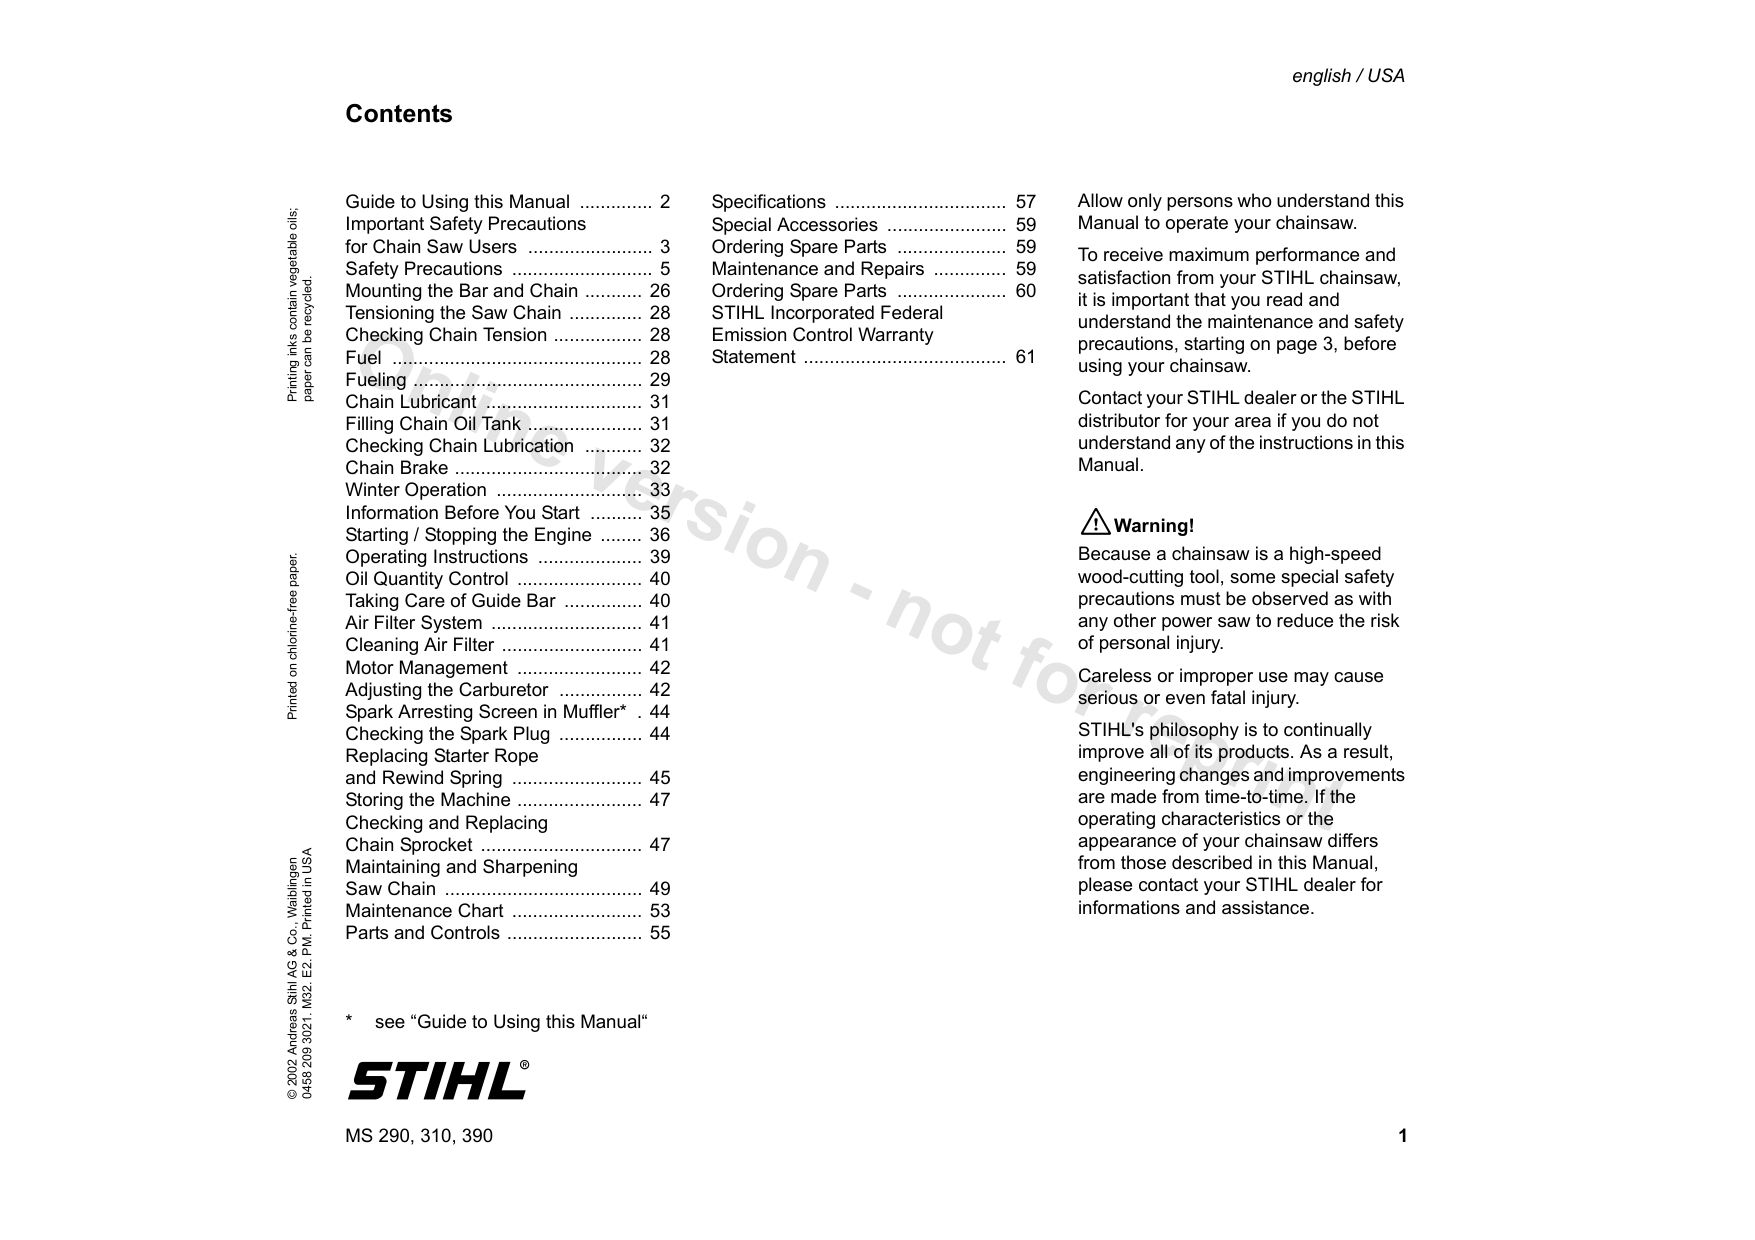 Stihl 290 310 390 chainsaw service manual Preview image 6